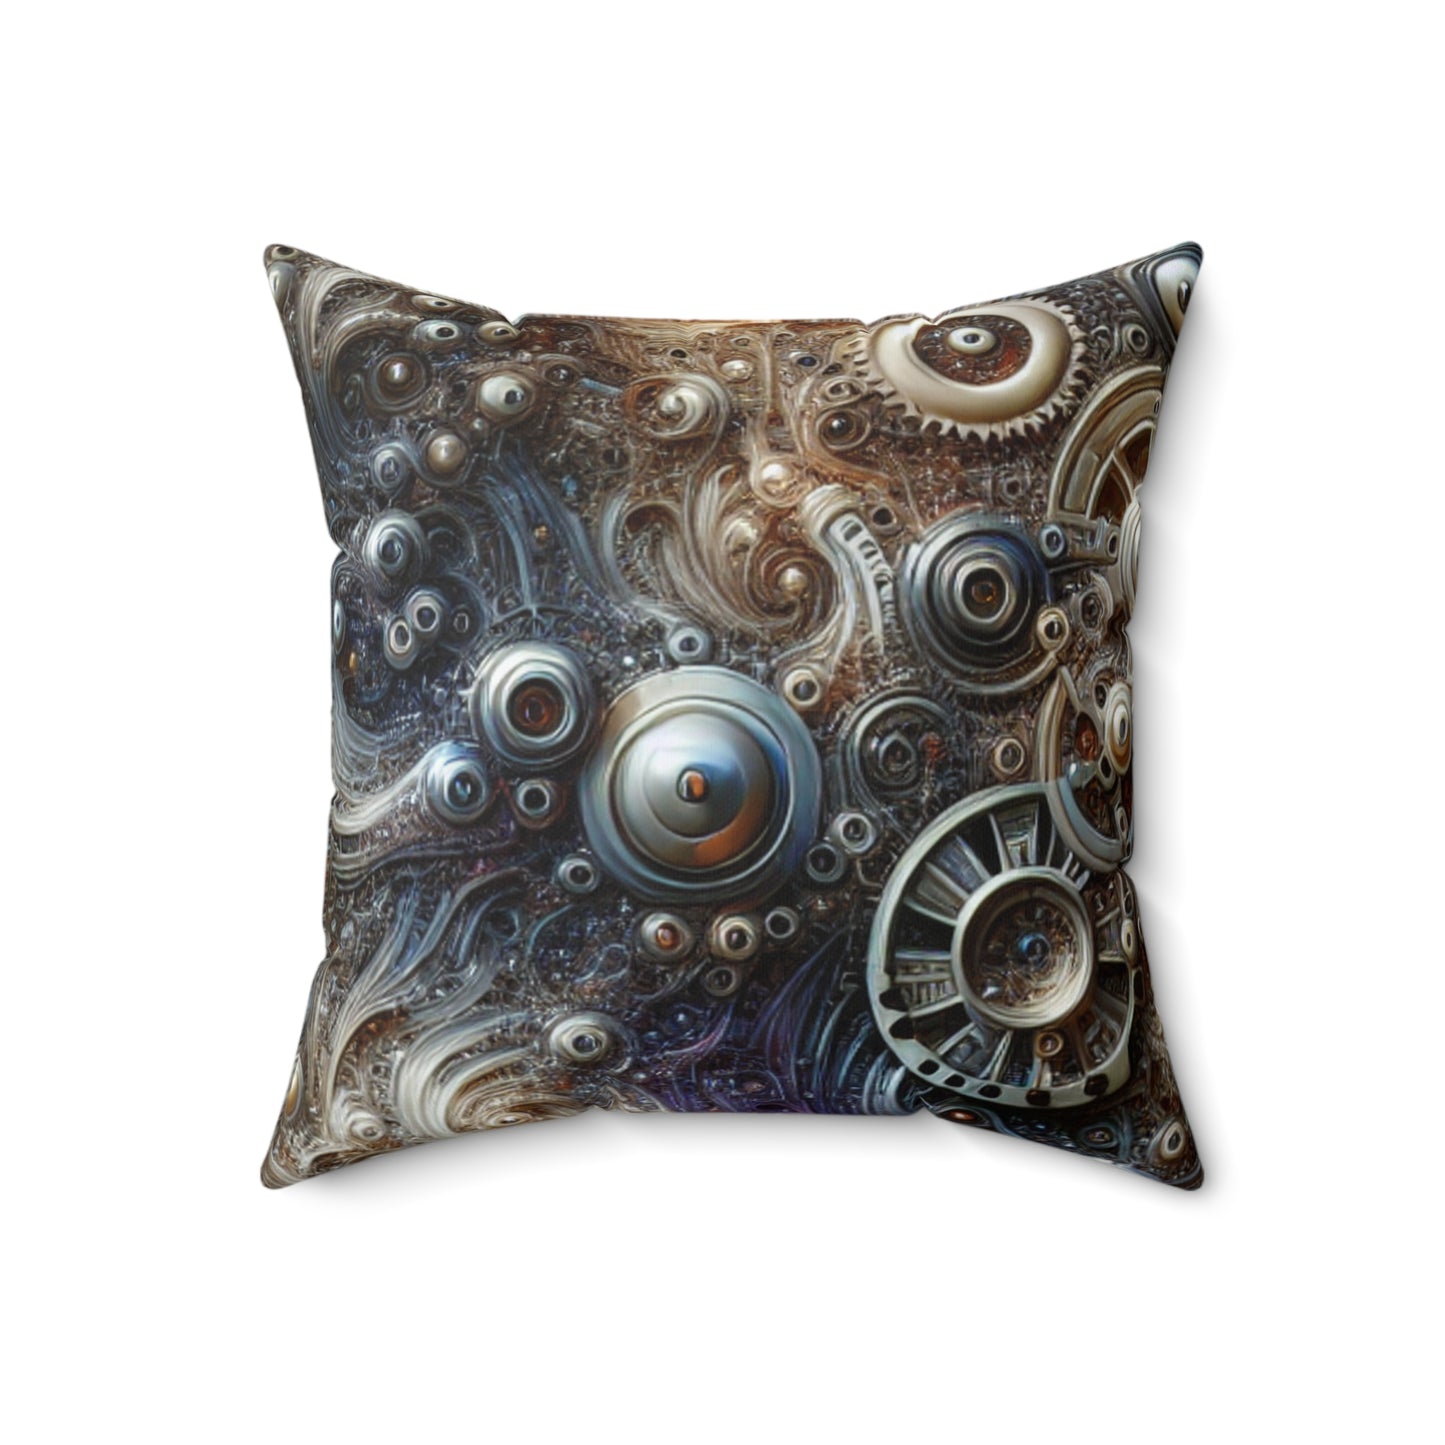 "Cybernetic Sentinel: A Futuristic Fusion of Man and Machine"- The Alien Spun Polyester Square Pillow Bio-mechanical Art